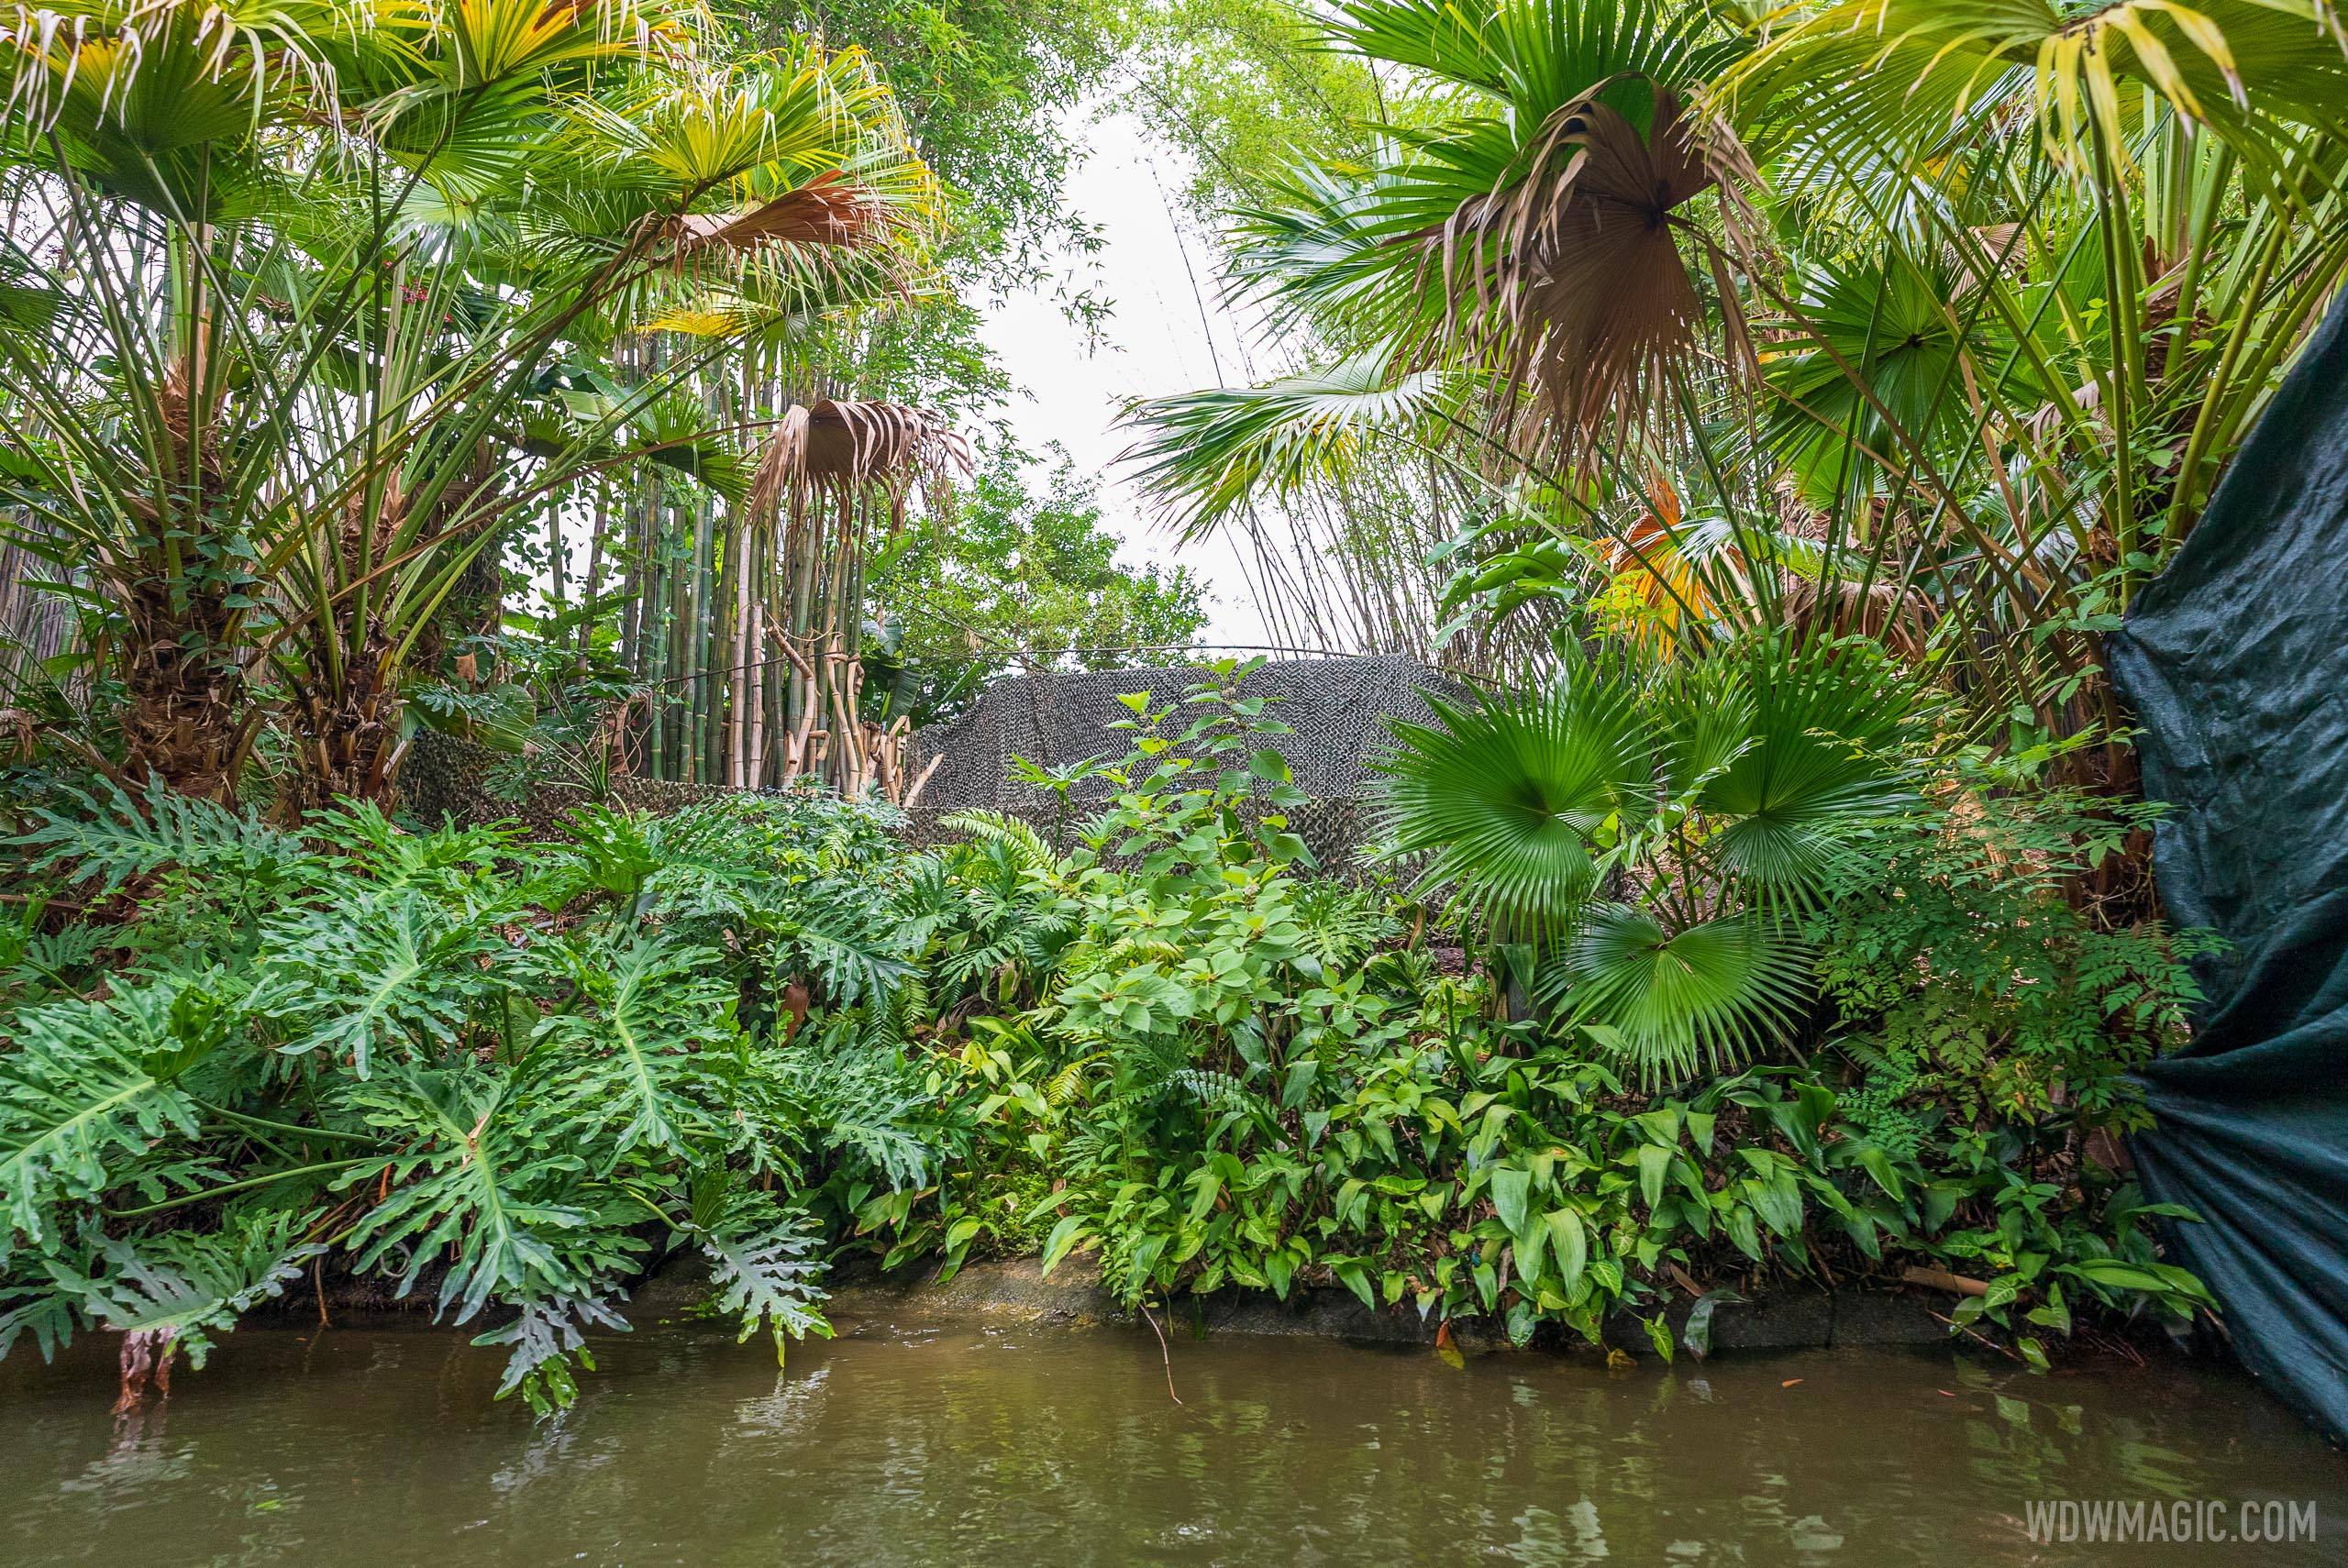 Work on the native scene at the Jungle Cruise - June 7 2021